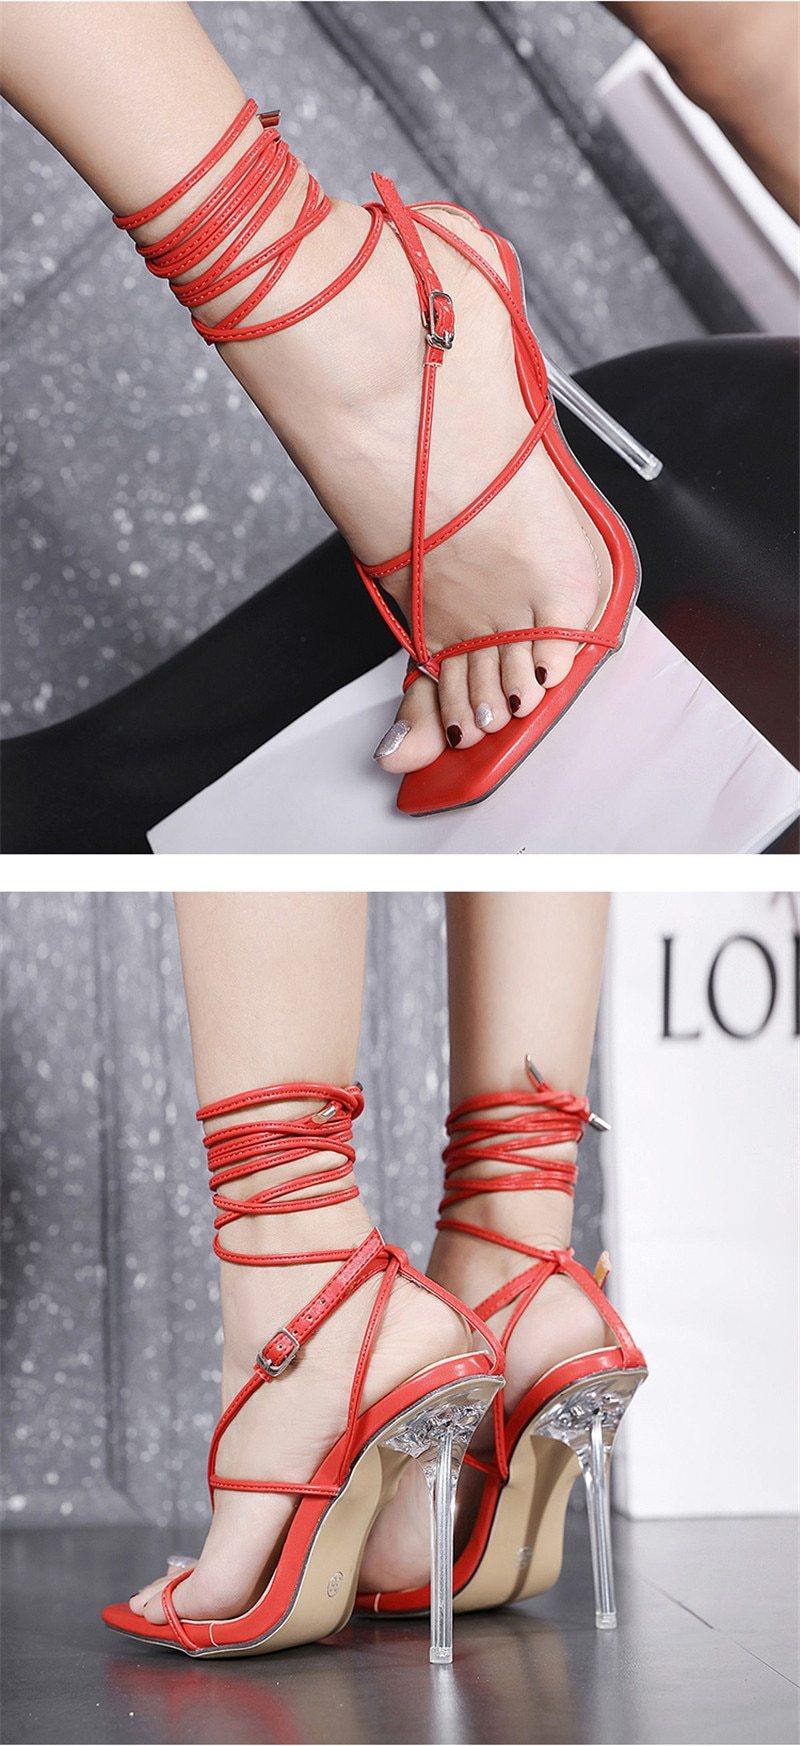 Extra Elegant Ankle Strappy Party High Heels - AM APPAREL